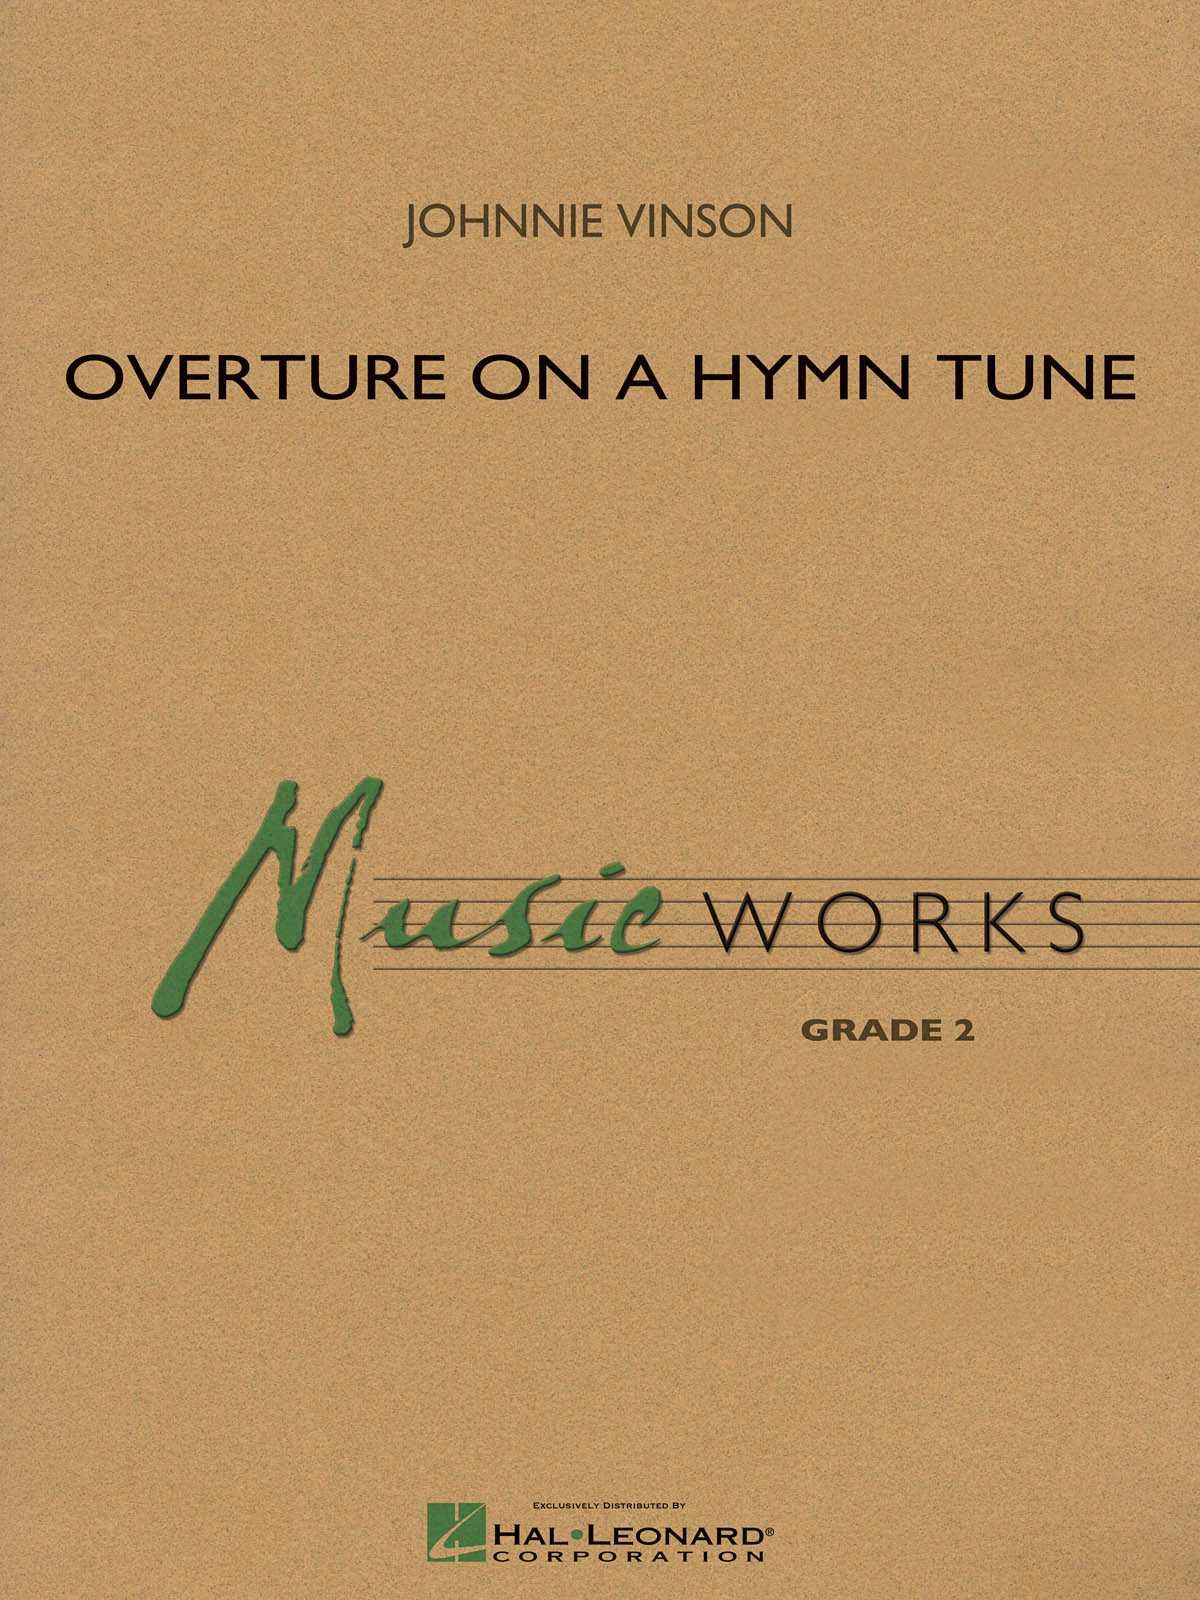 Johnnie Vinson: Overture on a Hymn Tune: Concert Band: Score & Parts